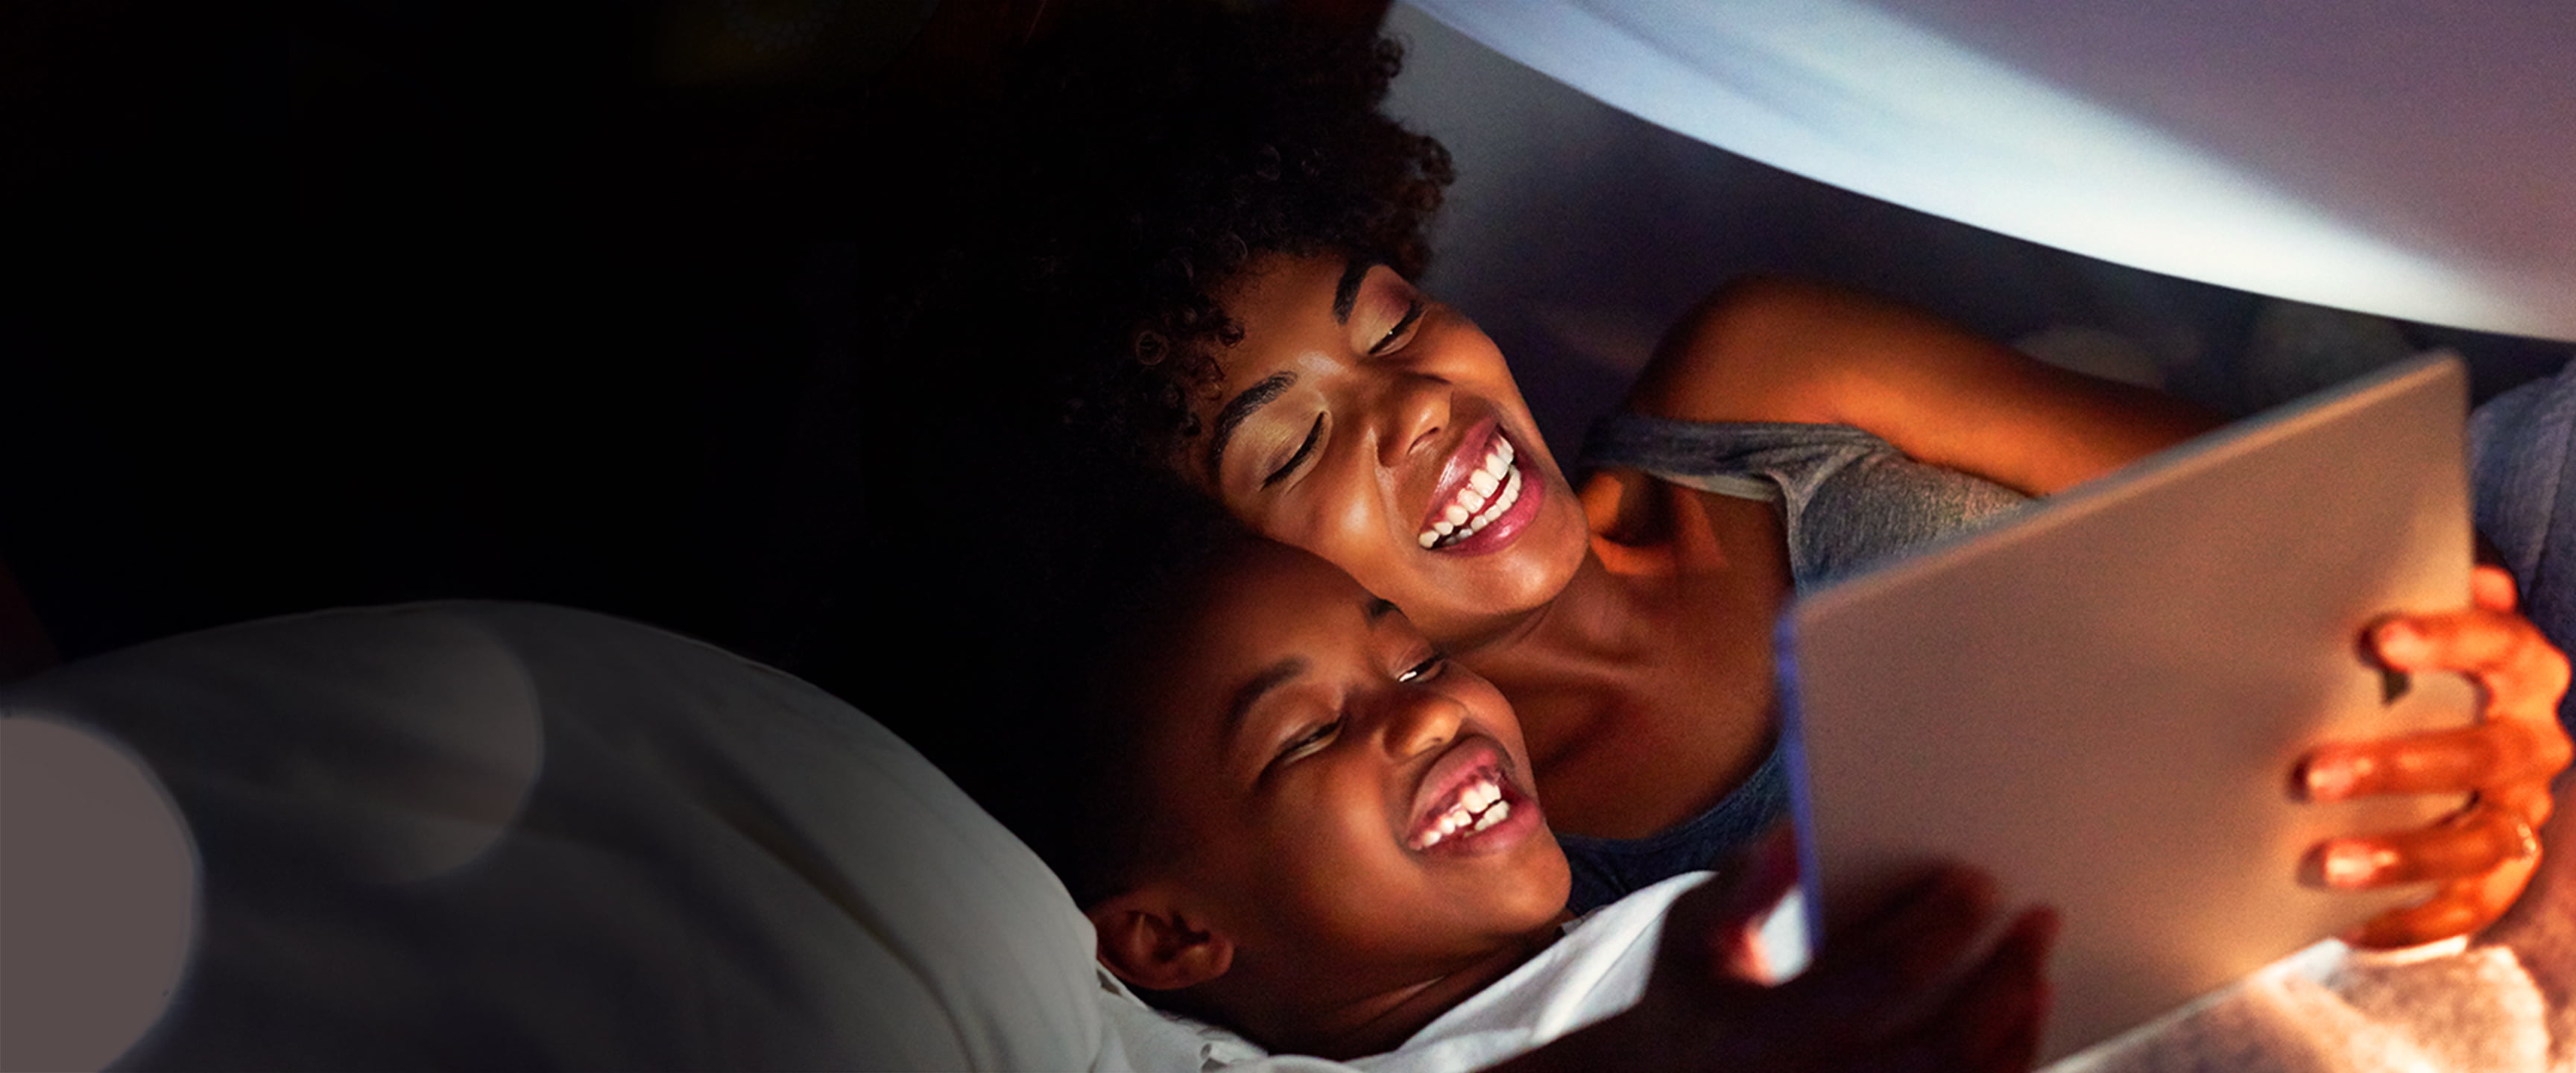 Mother and son reading a tablet in bed.